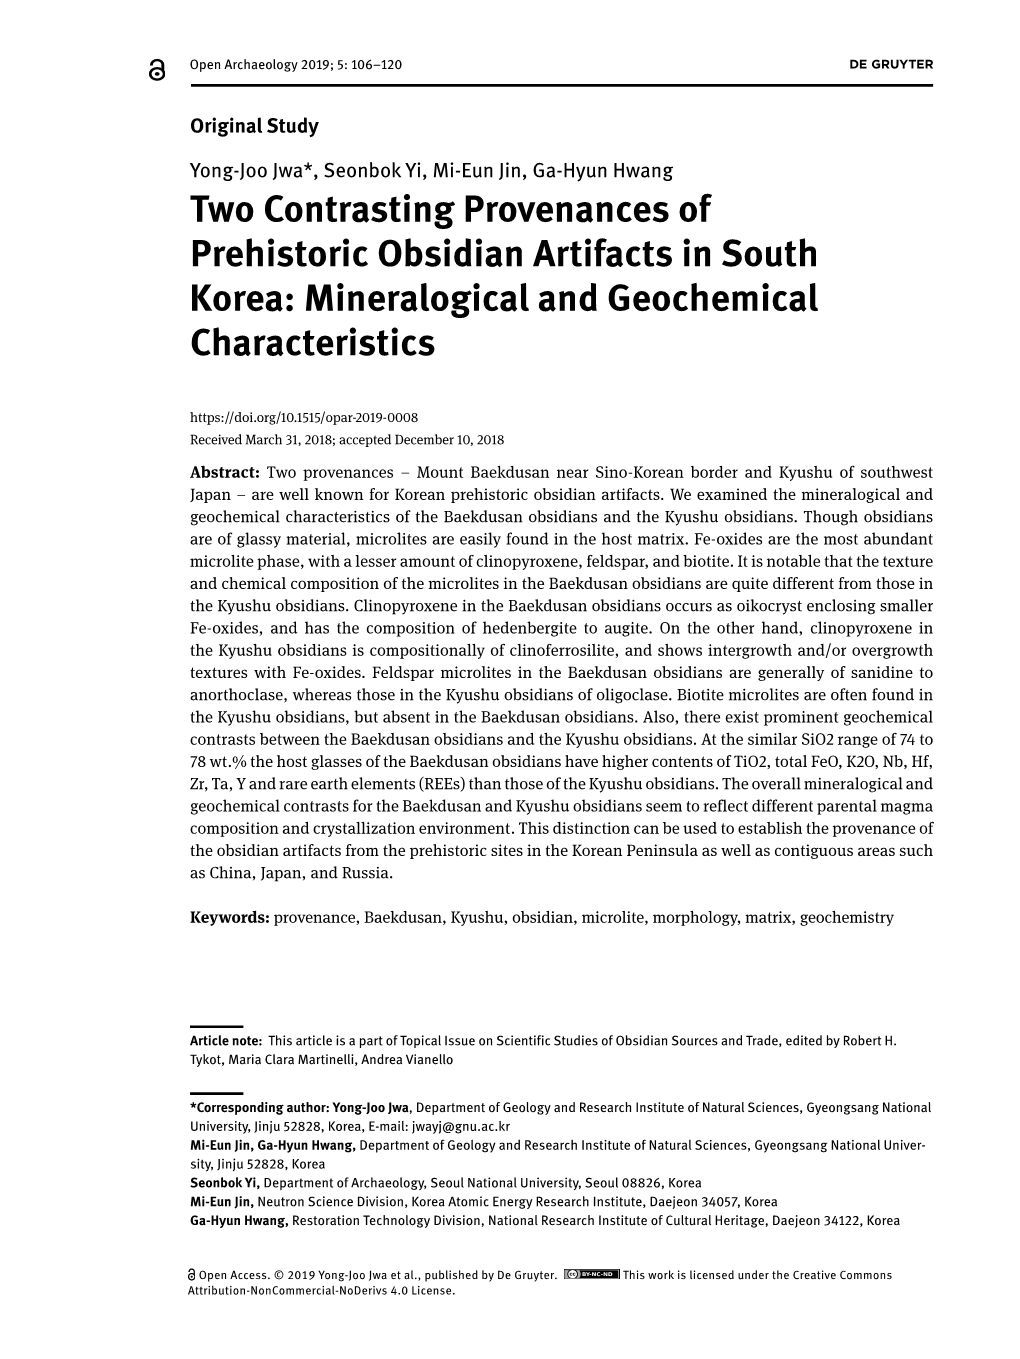 Two Contrasting Provenances of Prehistoric Obsidian Artifacts in South Korea: Mineralogical and Geochemical Characteristics